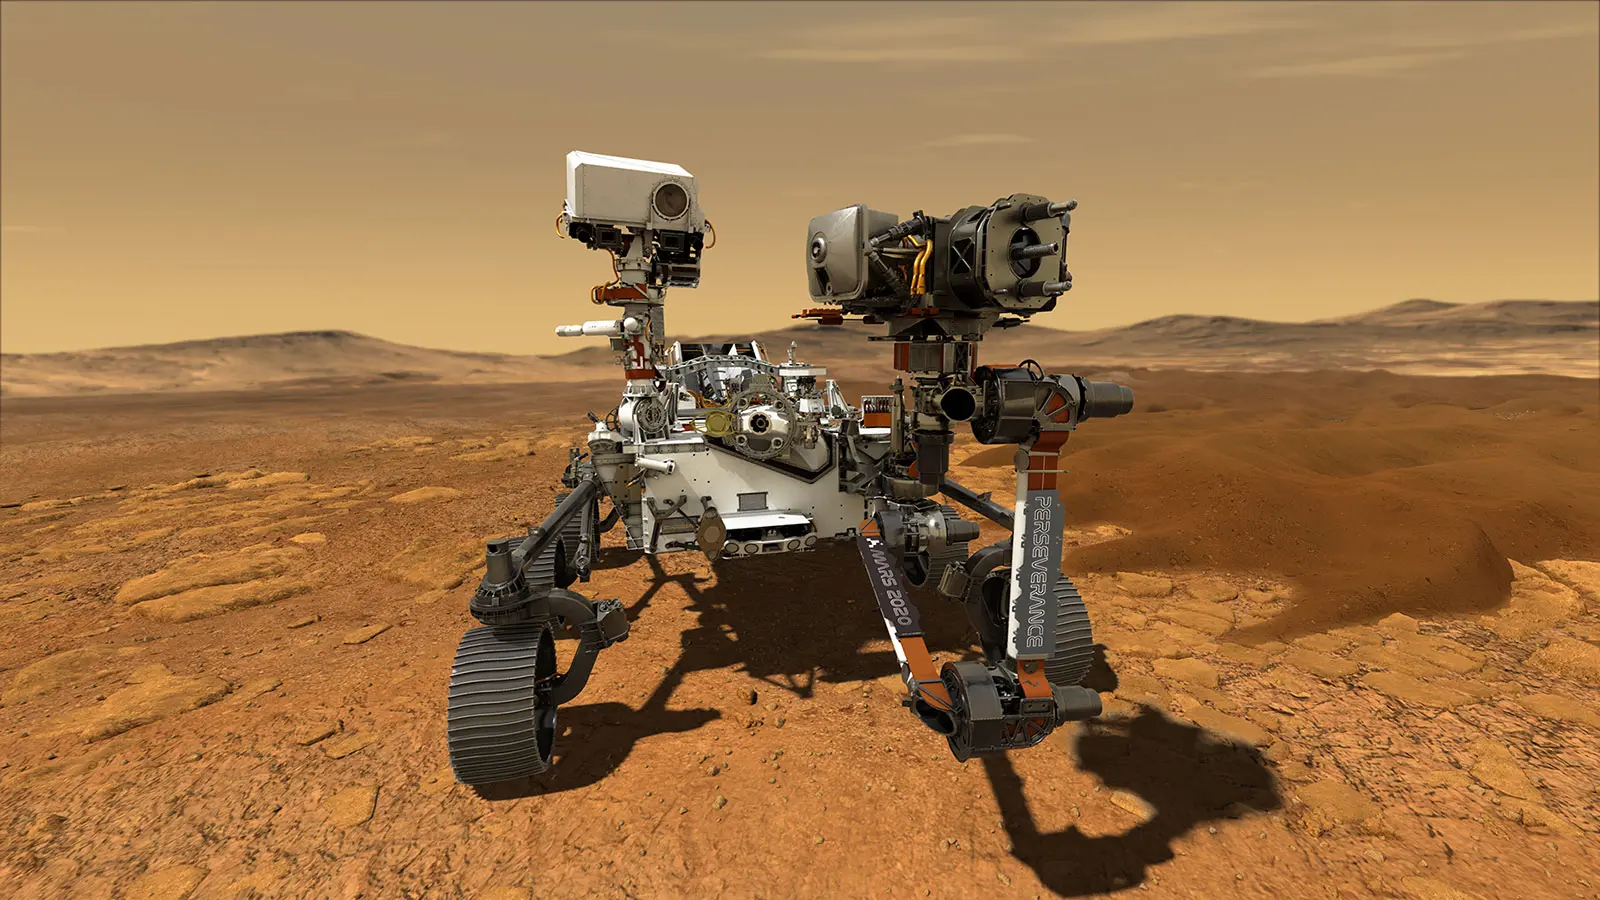 NASA's new Perseverance rover has landed safely on Mars!